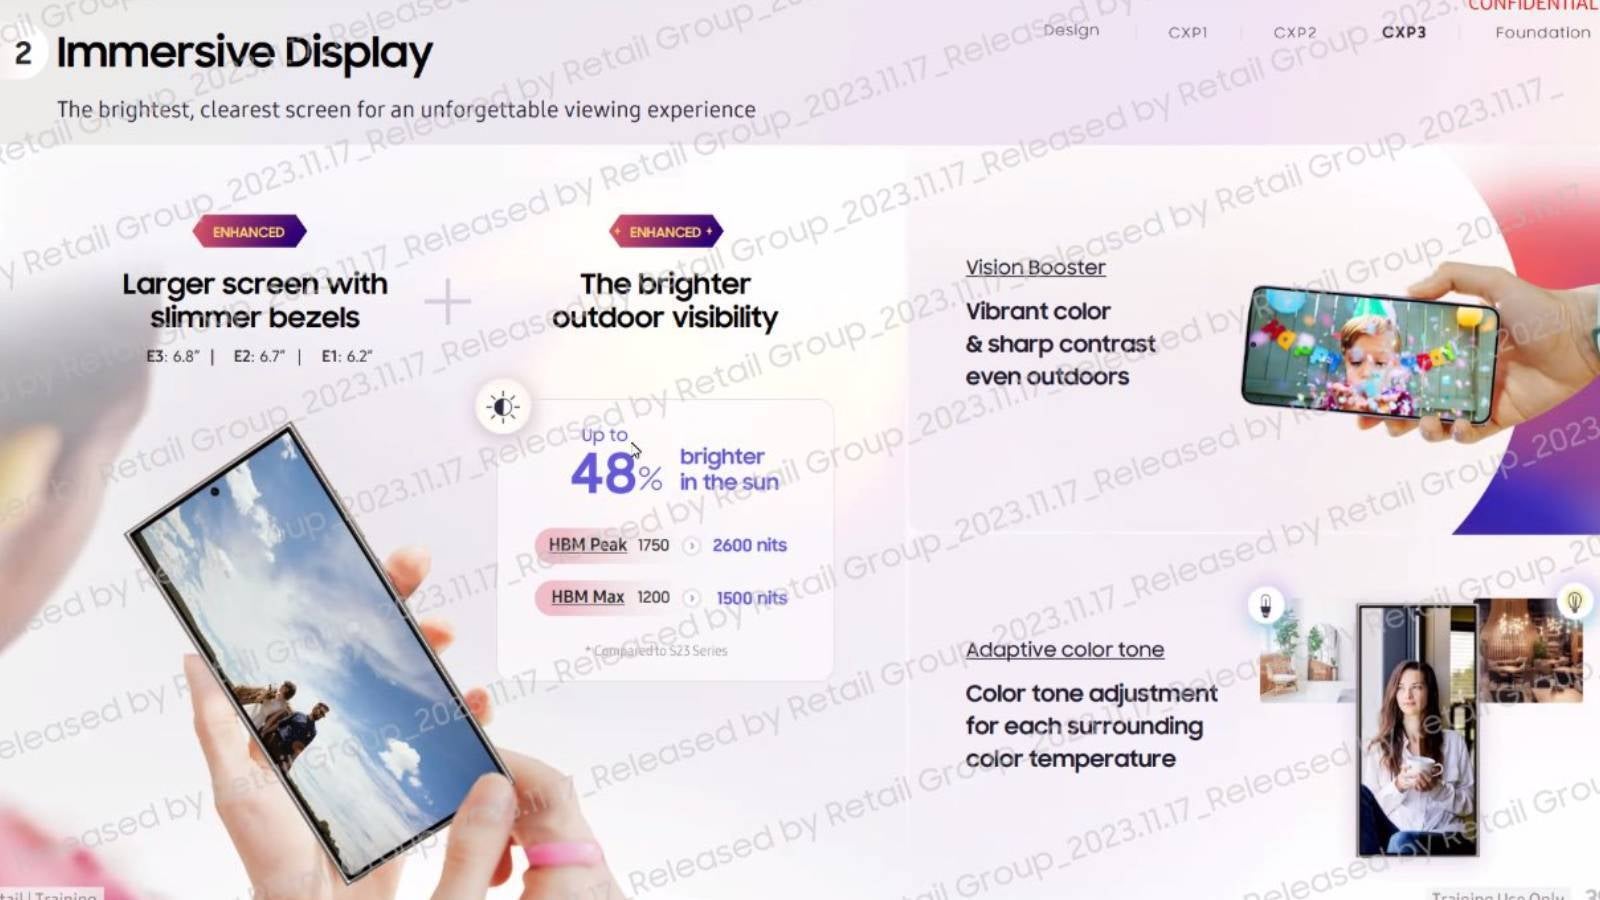 Galaxy S24 family reportedly has brighter displays - Guy releases secret Galaxy S24 slides Samsung showed employees in Zoom meeting